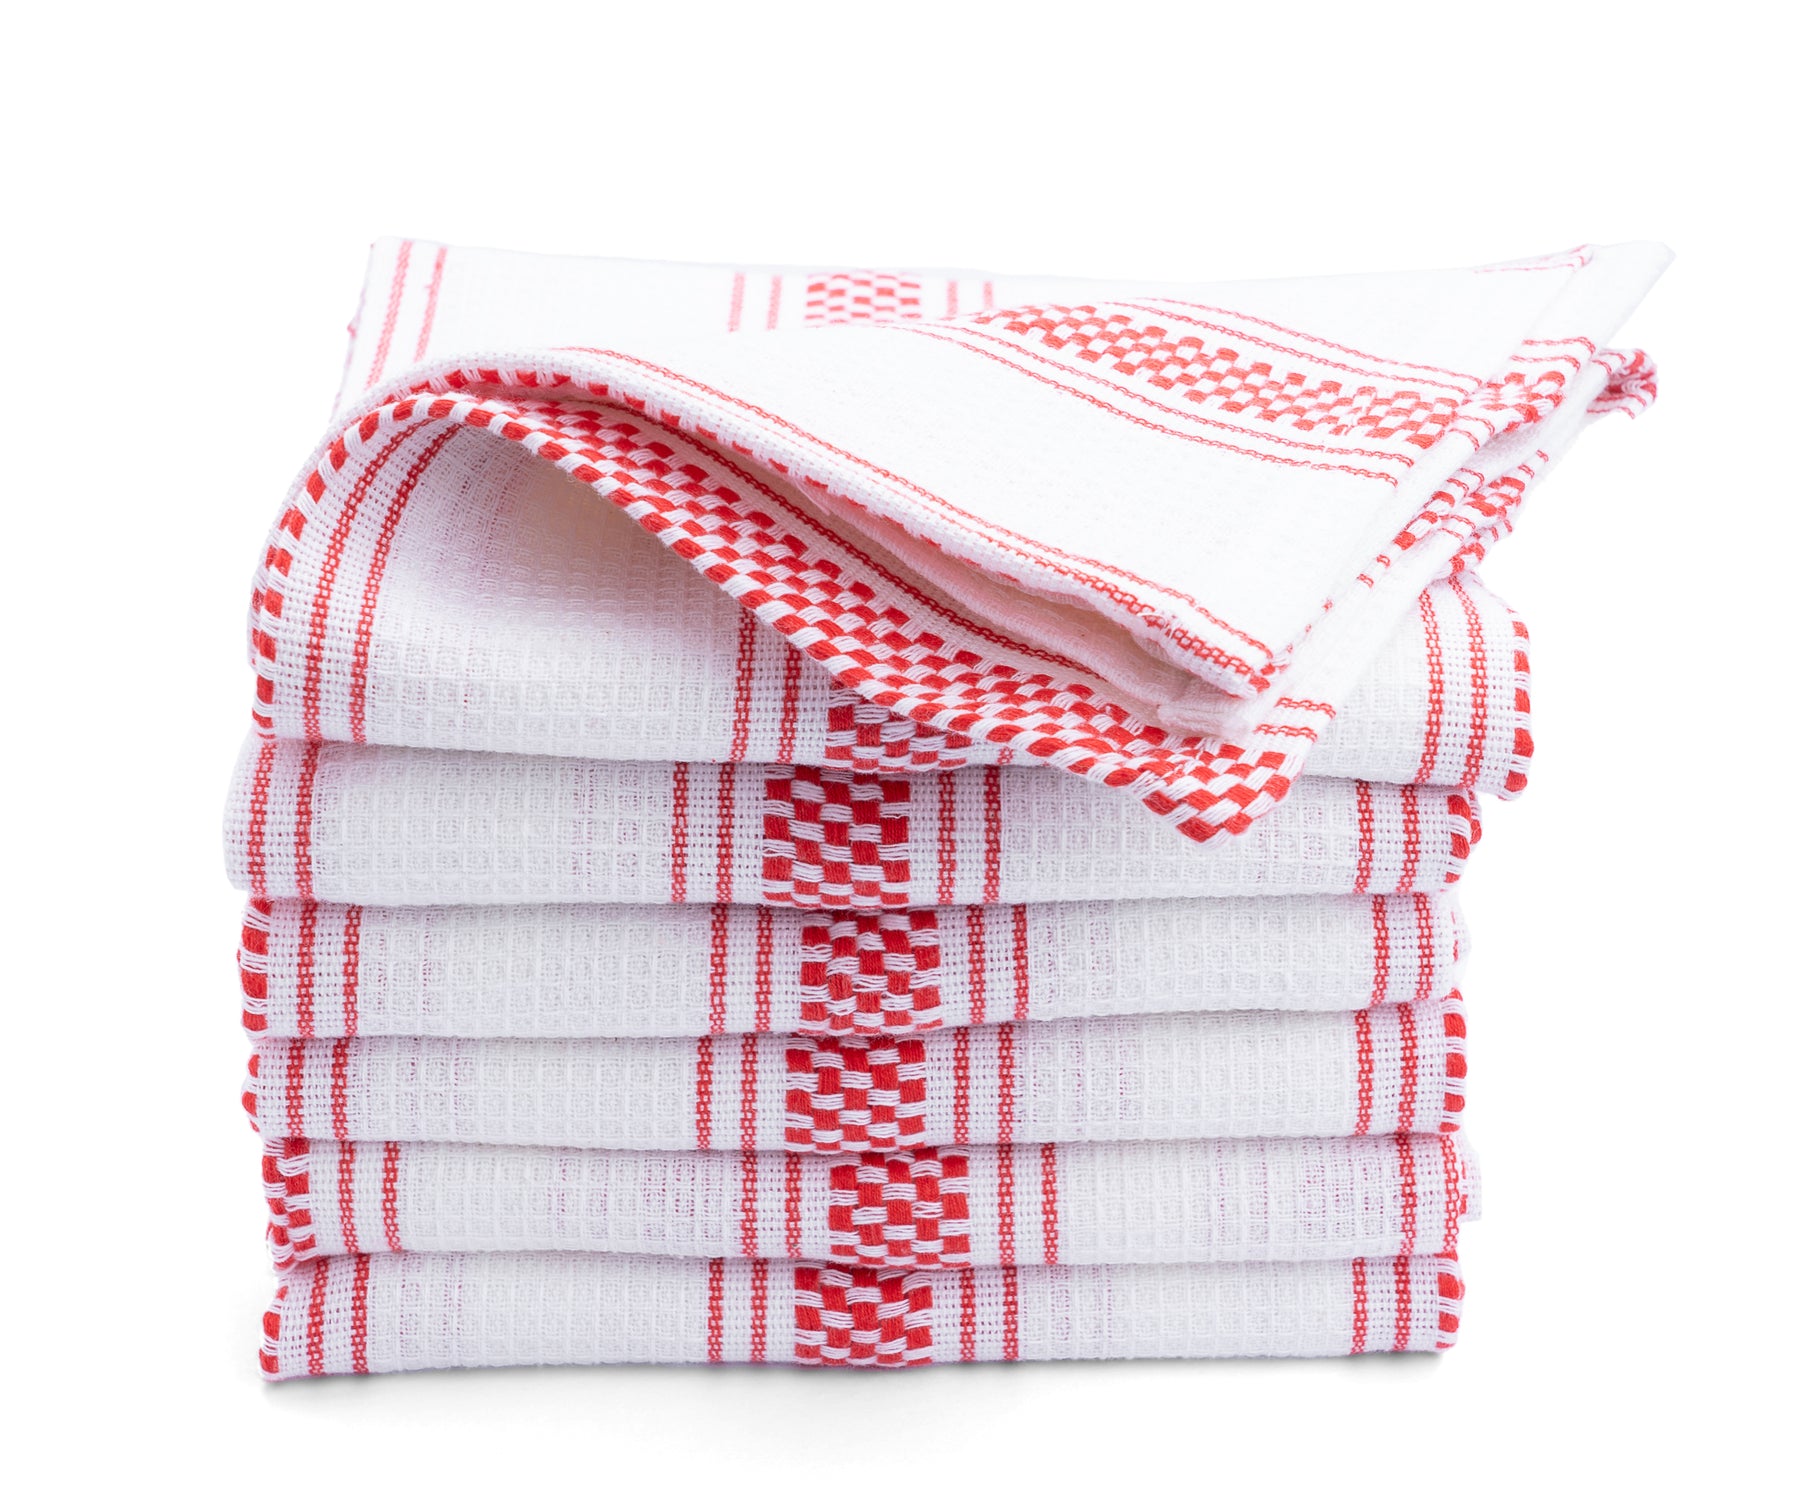 red cotton dish towels, kitchen towel, dish towels for drying dishes, tea towel, kitchen towel sets, striped kitchen towels, striped kitchen towels, red kitchen towels